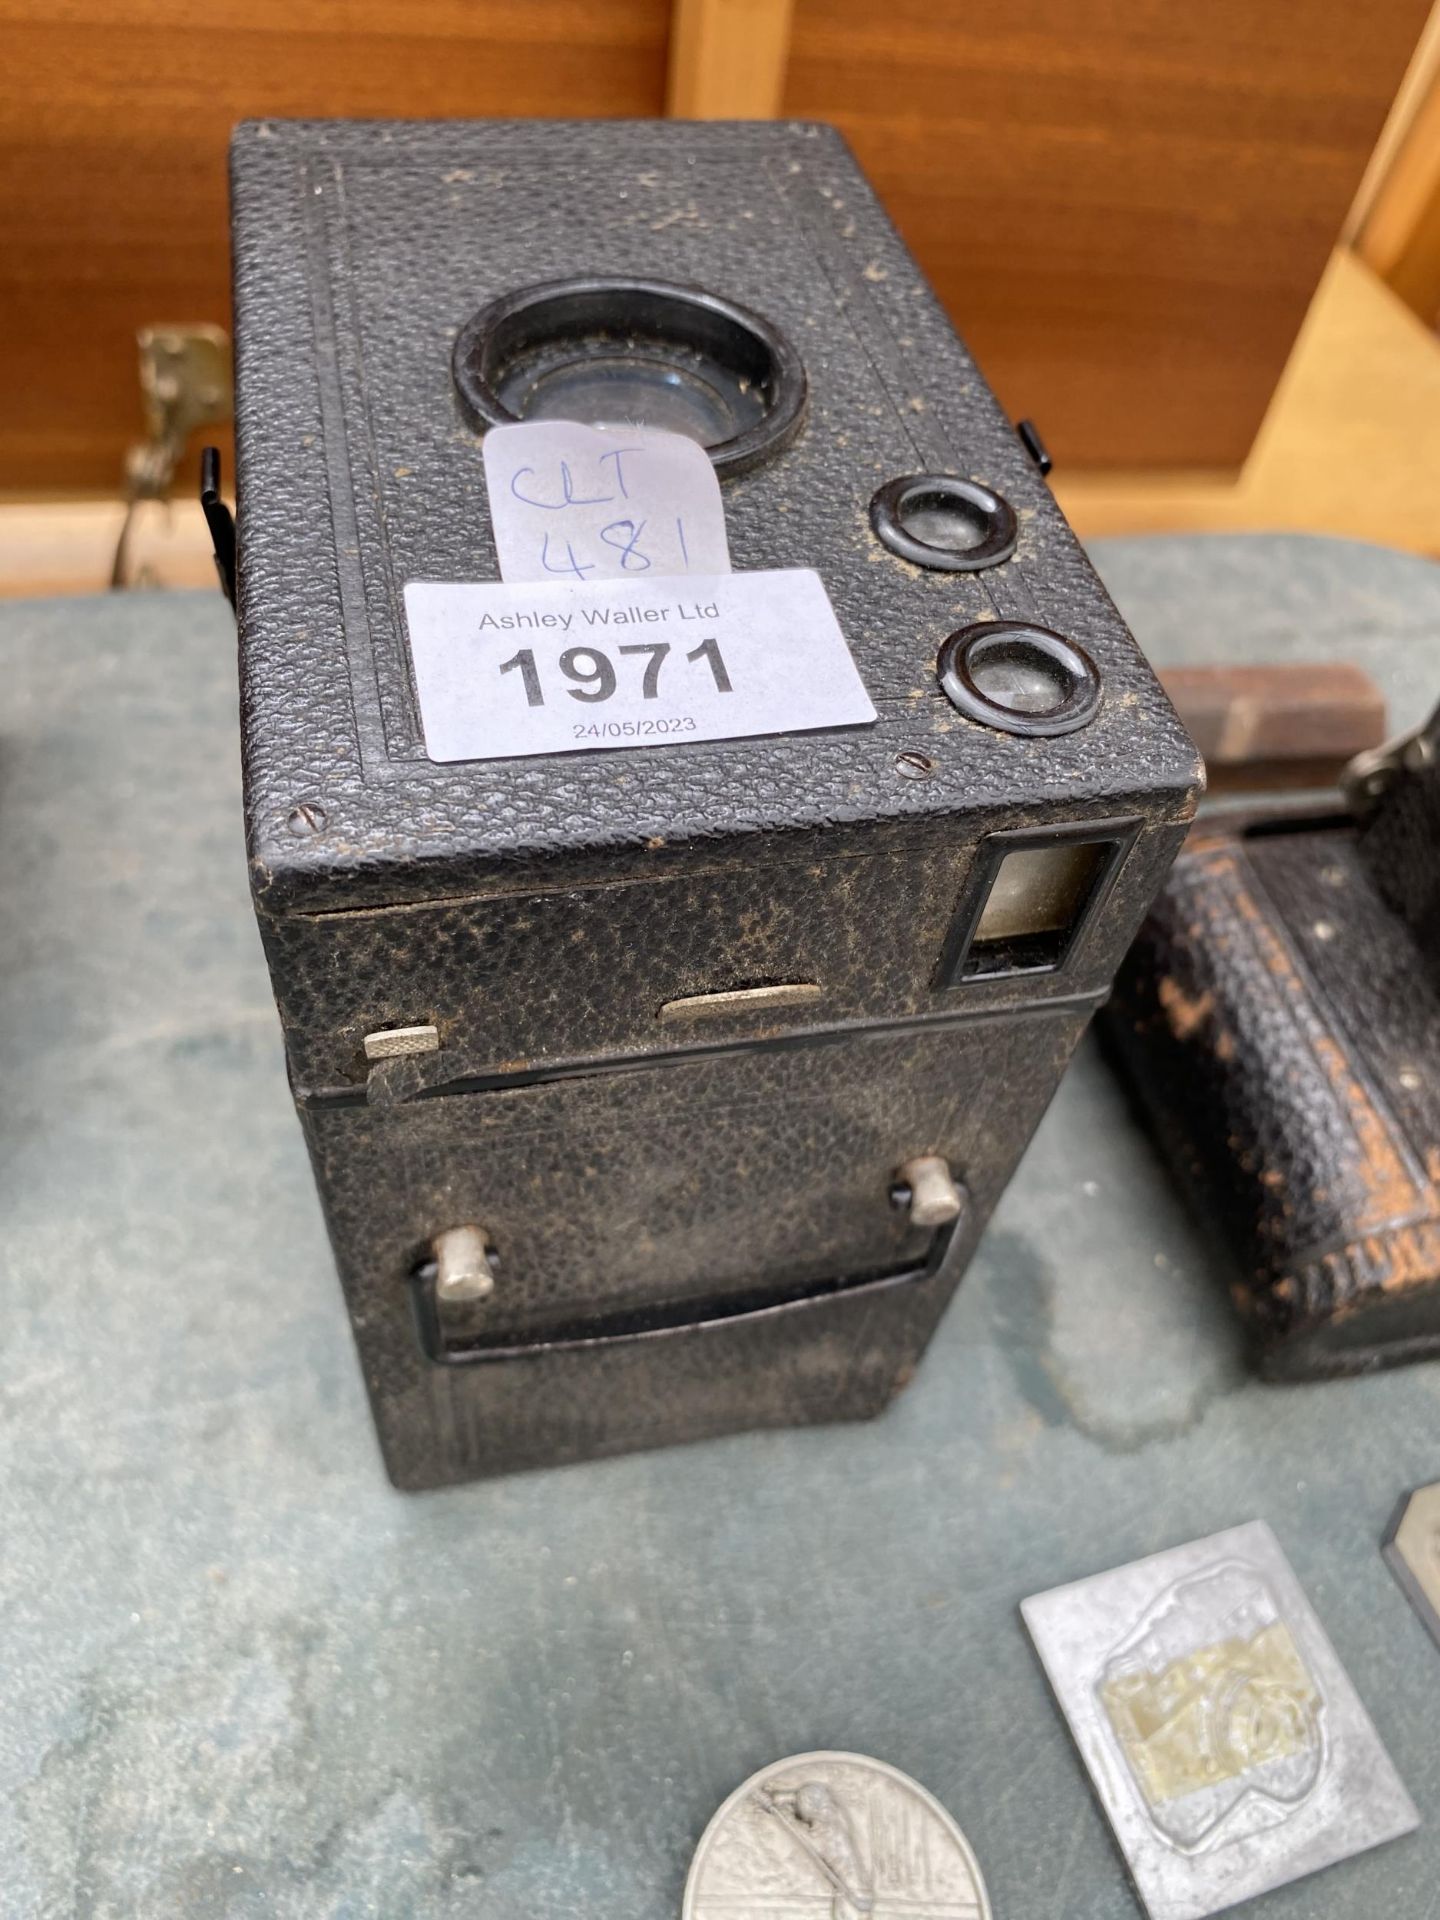 A KODAK EASTMANN AUTOMATIC CAMERA, FURTHER CAMERA AND METAL CAMERA PLAQUES - Image 3 of 4